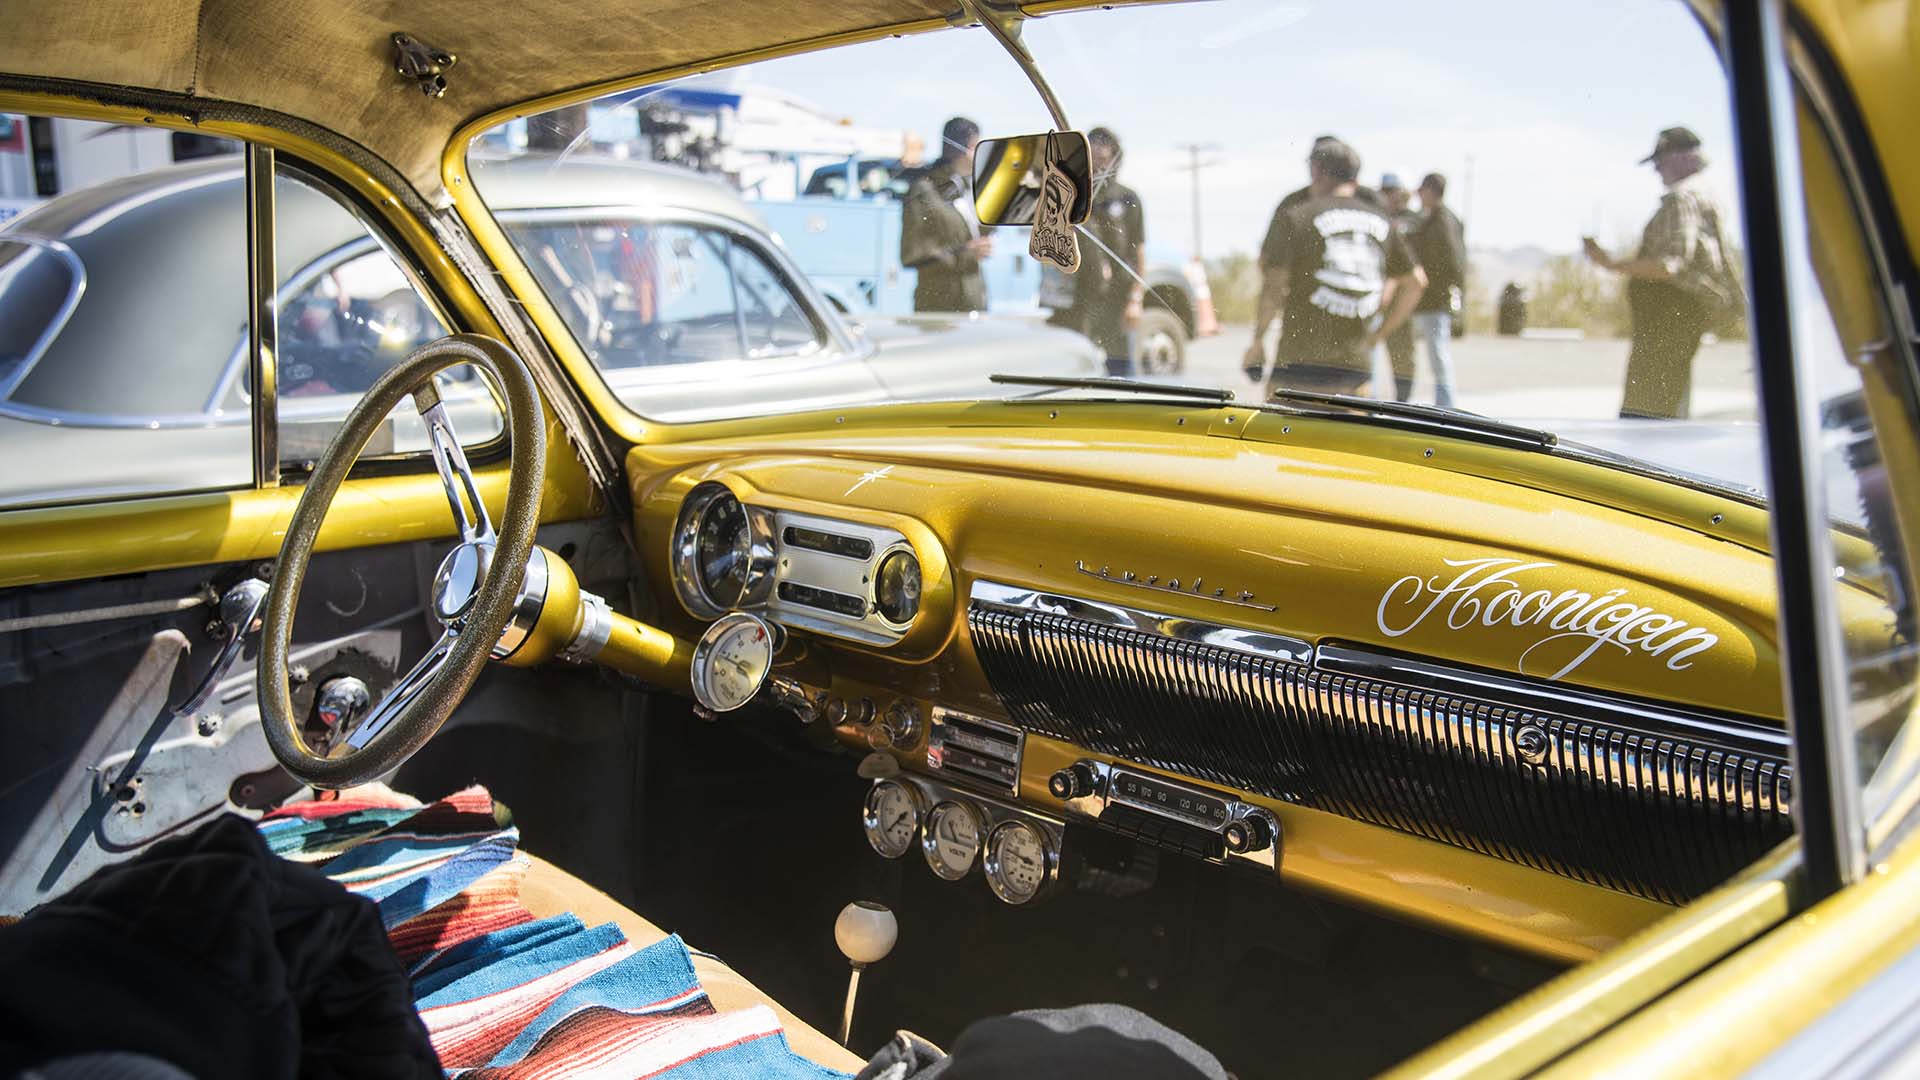 Classic hot rod enthusiasts take a break from driving old Route 66 in Ludlow, California.